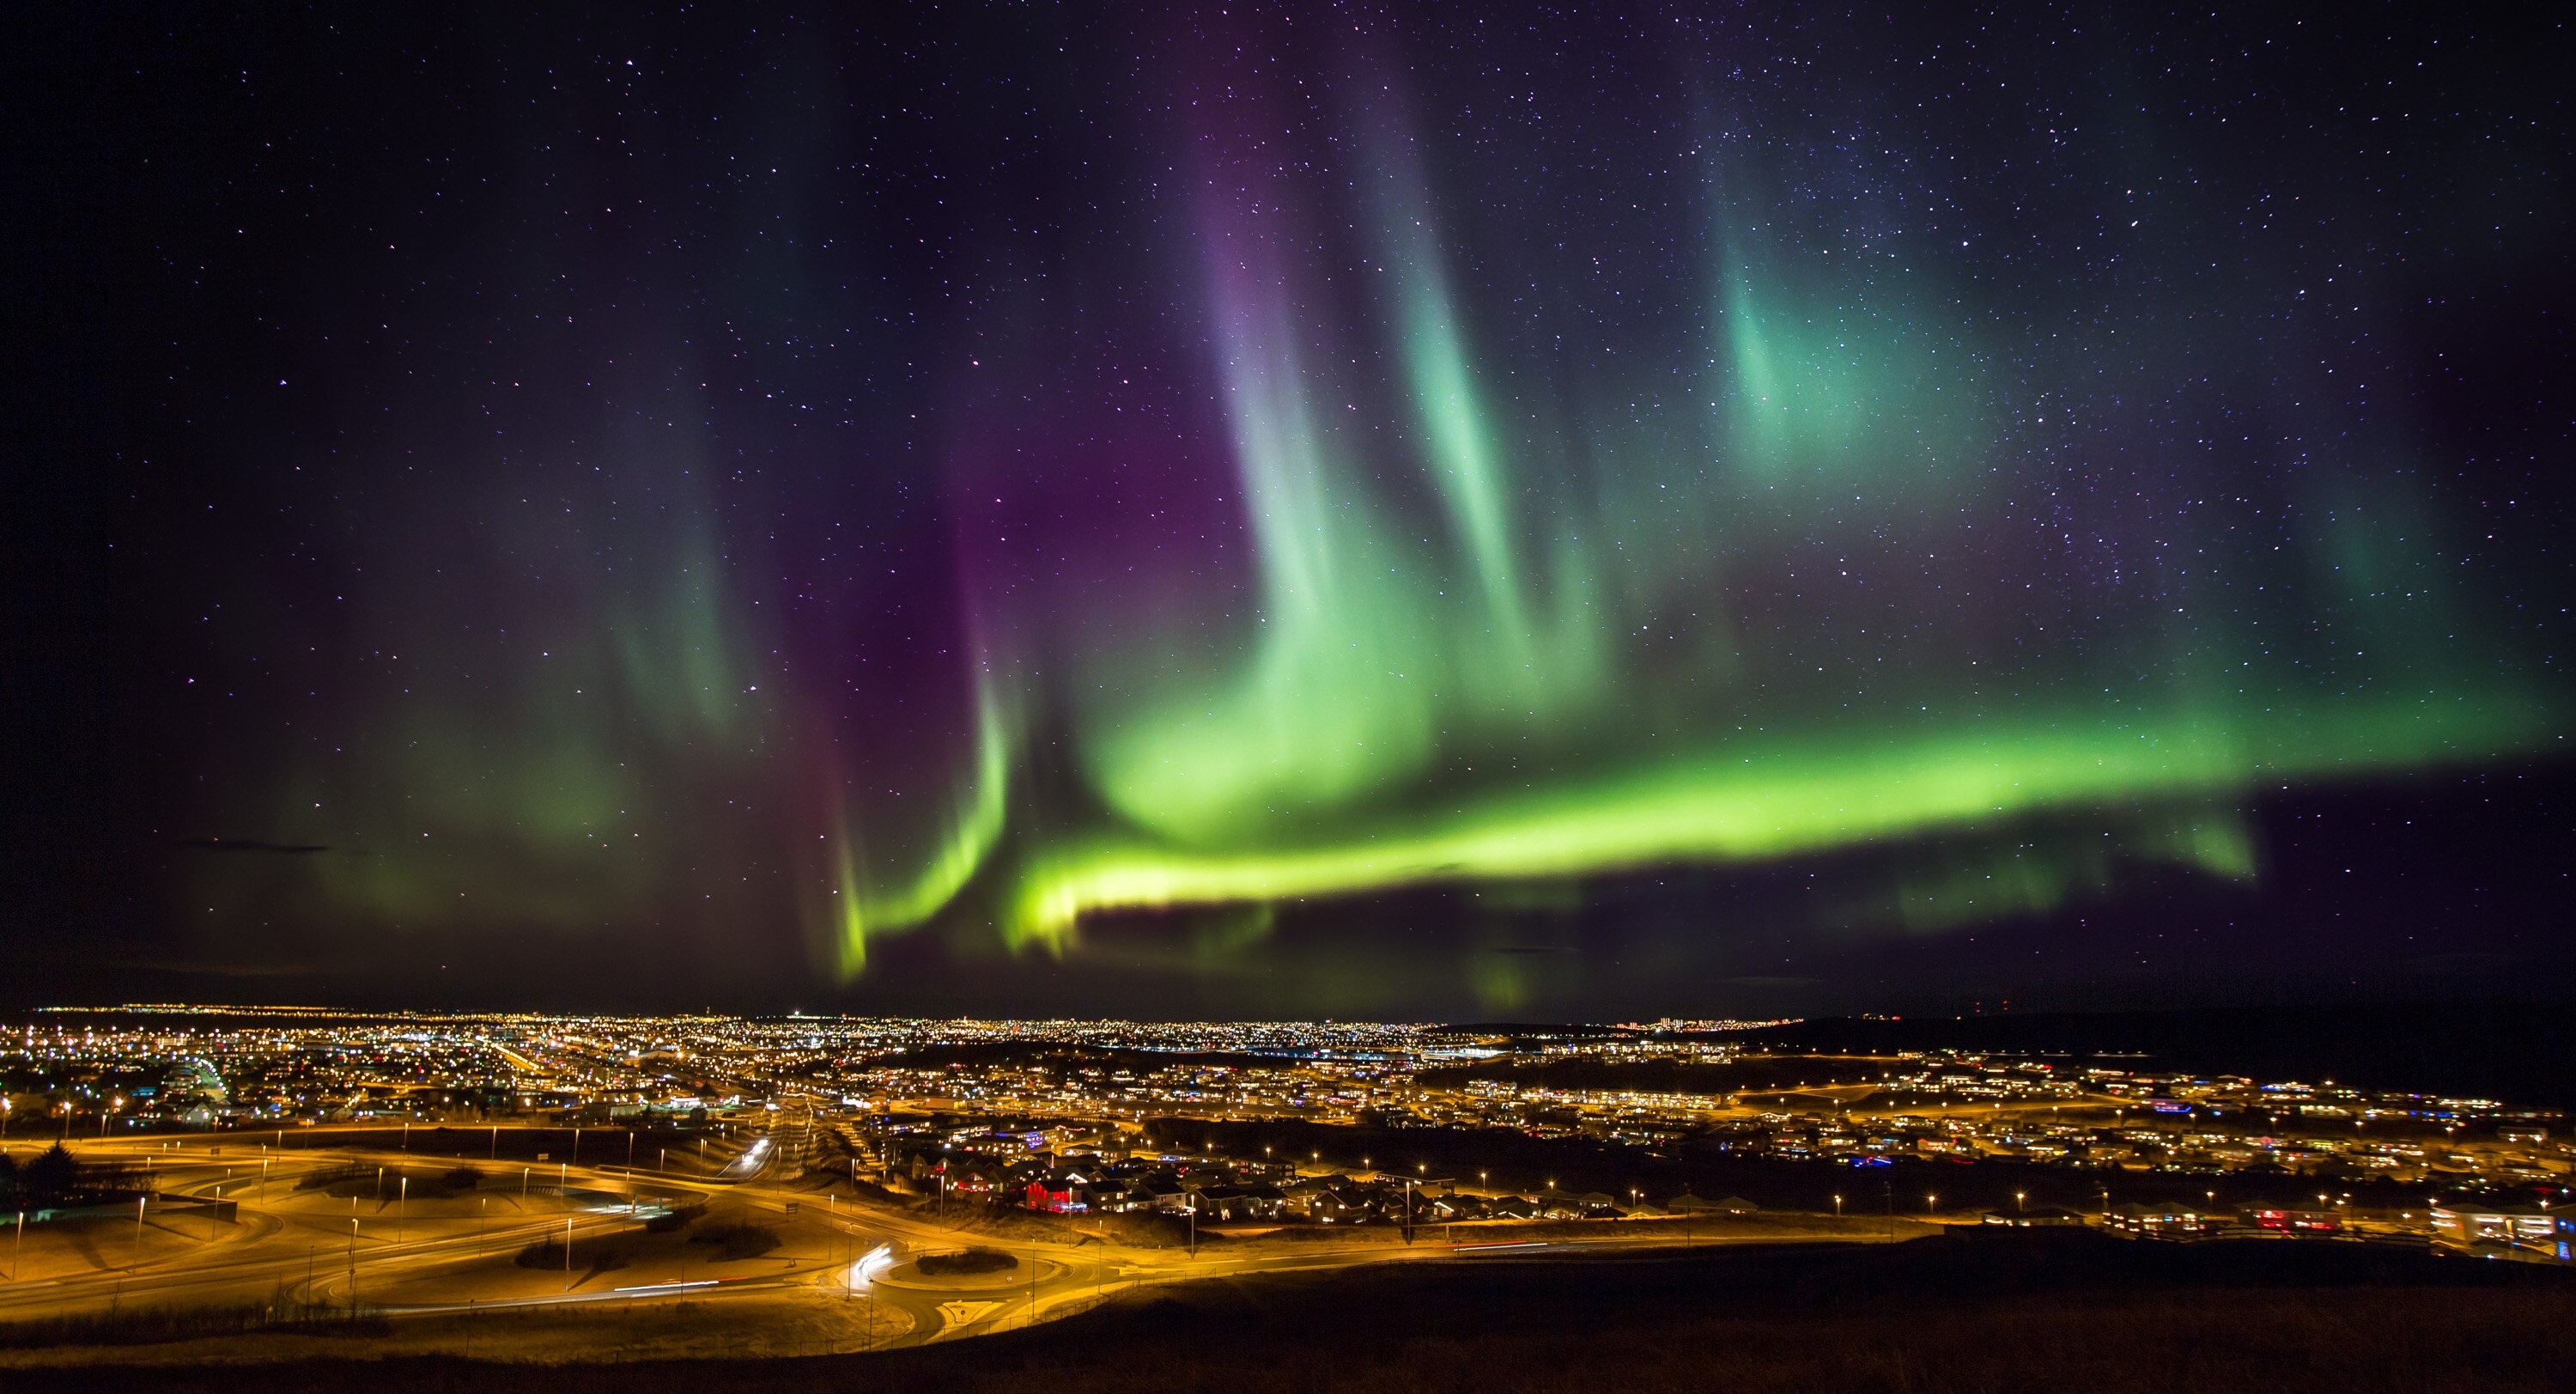 Iceland and Northern Lights city breaks